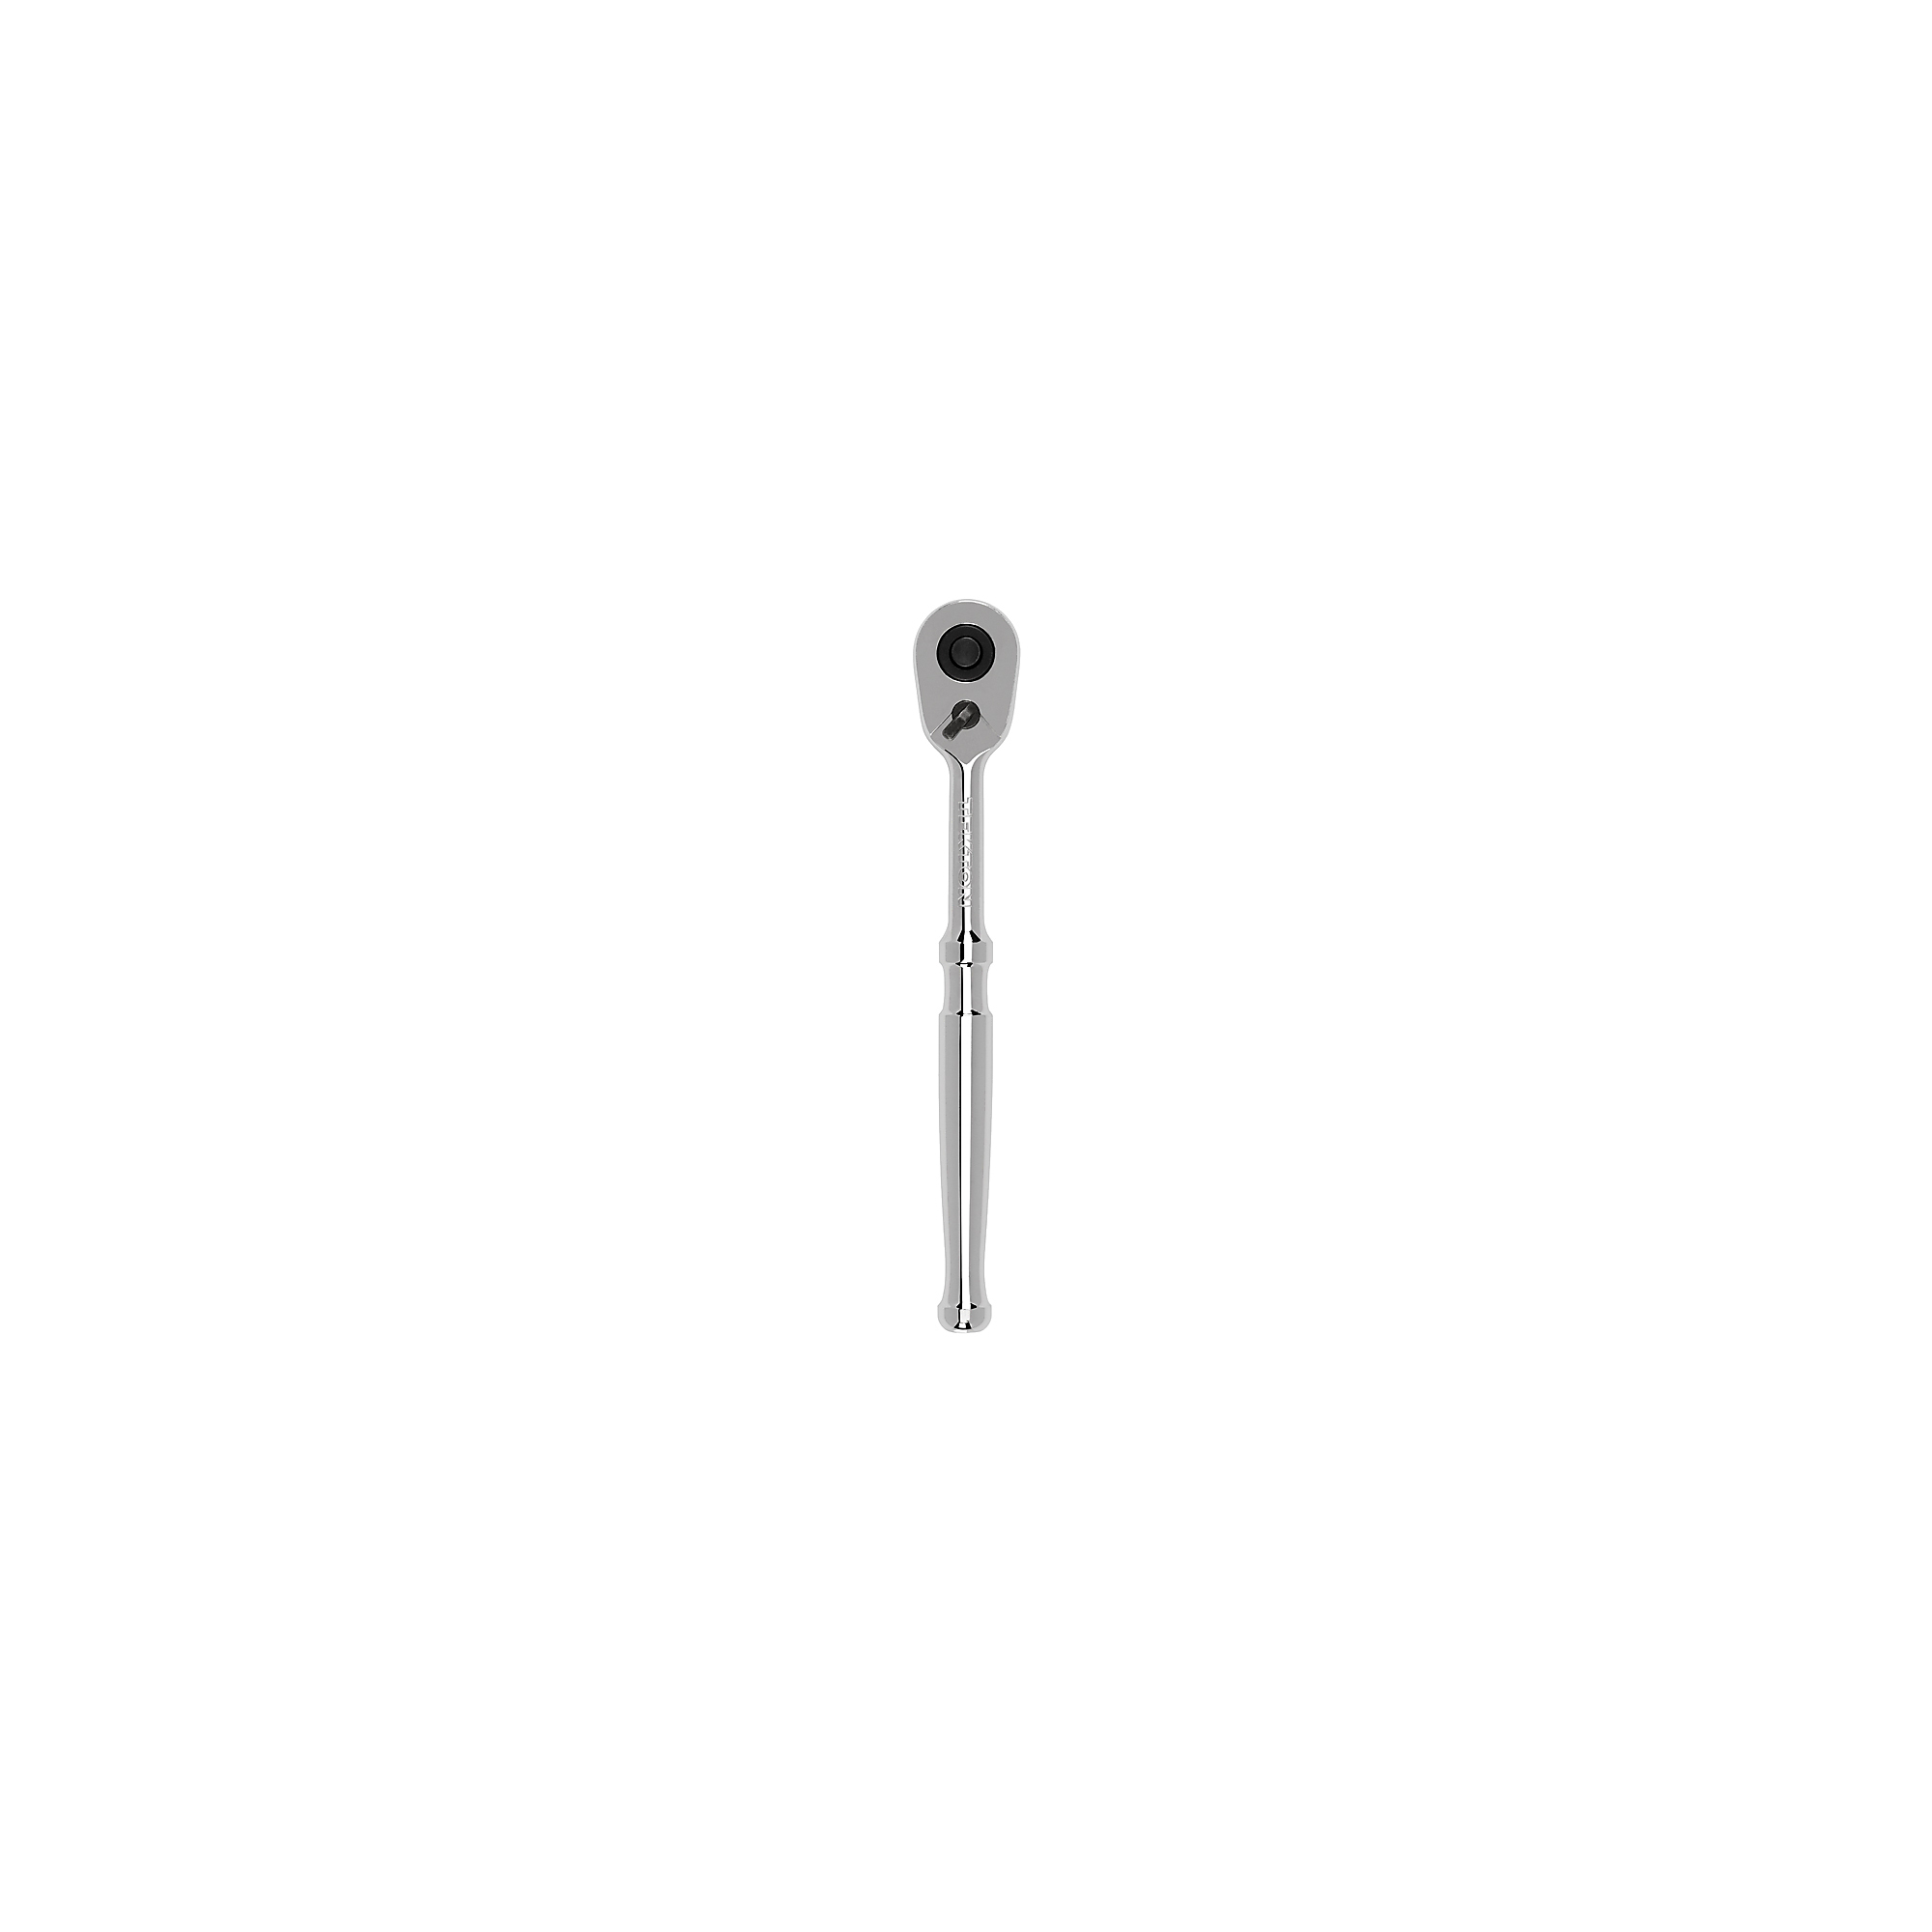 Tekton, 1/4Inch Drive x 6Inch Quick-Release Ratchet, Drive Size 1/4 in, Tool Length 6 in, Pieces (qty.) 1 Model SRH11006